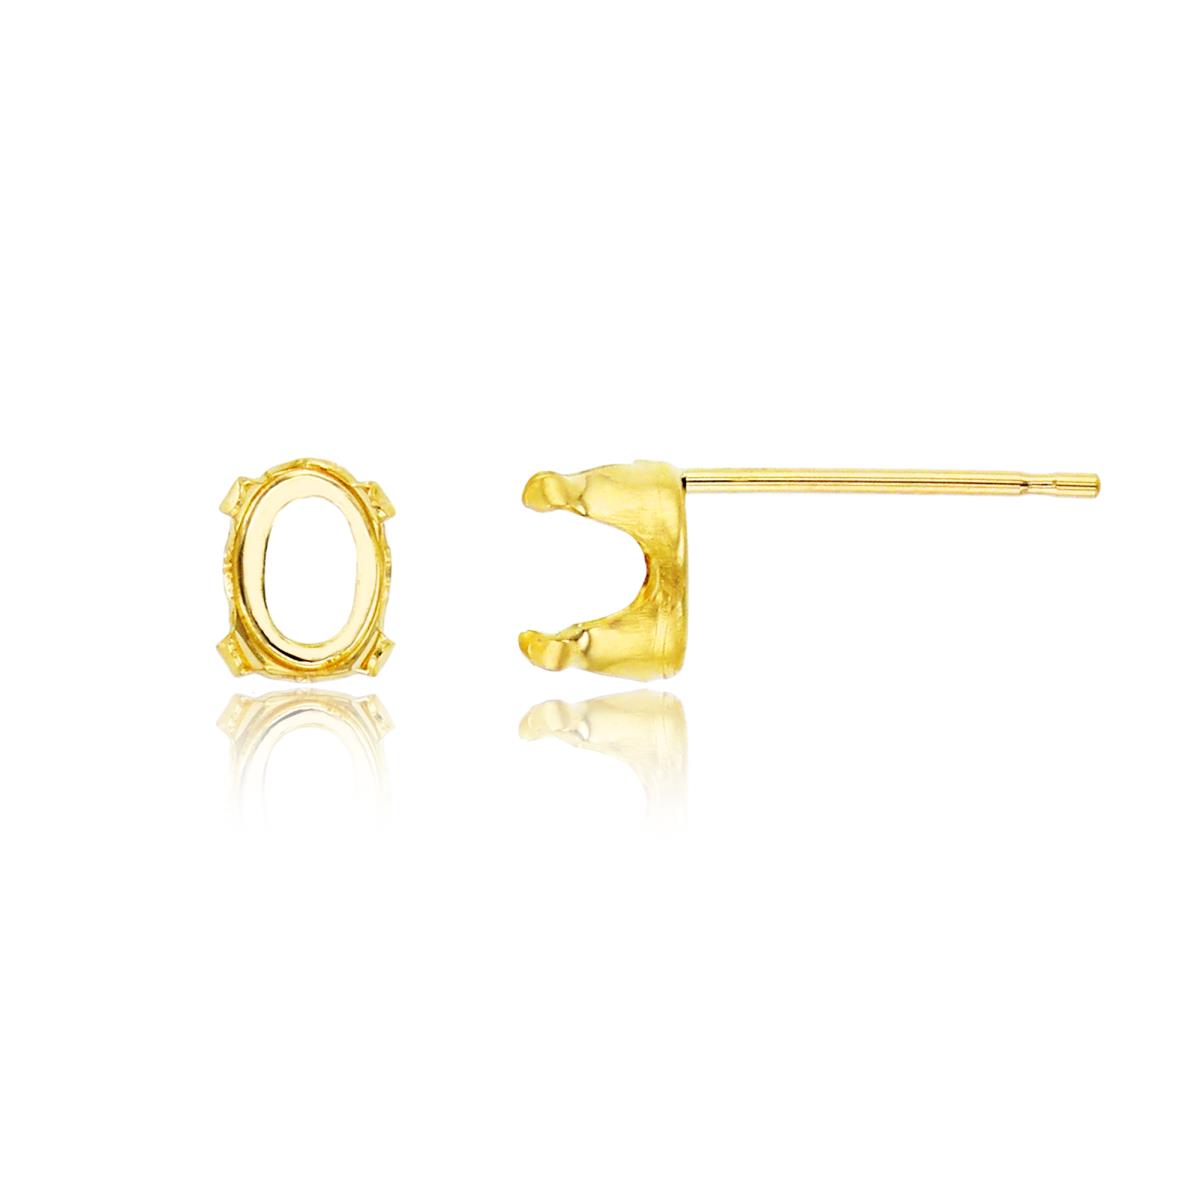 10K Yellow Gold 7x5mm Oval 4-Prong Stud Finding (PR)